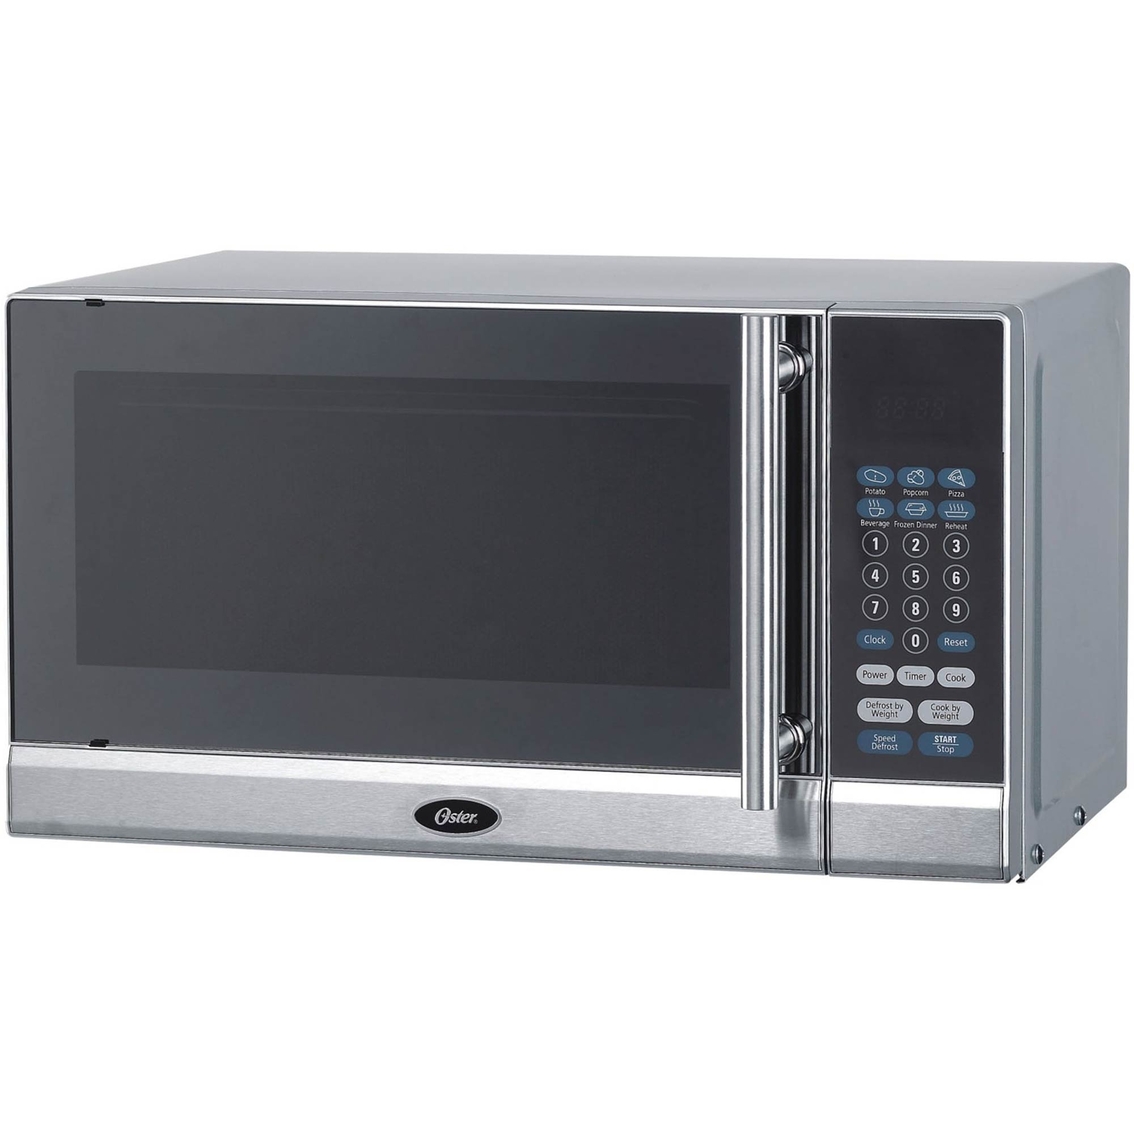 Oster 0.7 Cu. Ft. Stainless Steel Microwave Oven | Atg Archive | Shop